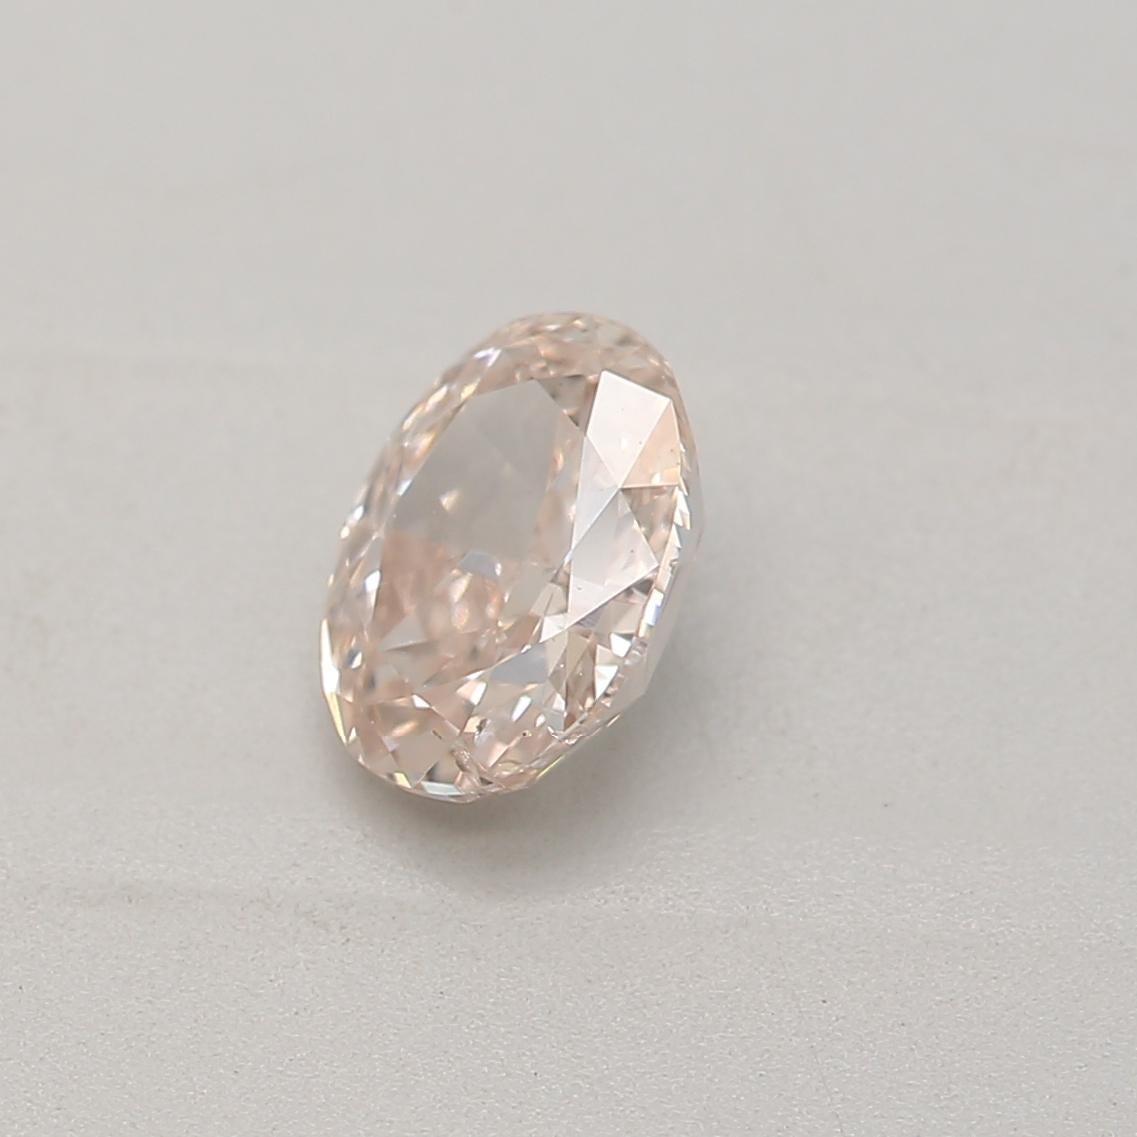 Oval Cut 0.42-CARAT, LIGHT PINK BROWN, OVAL CUT DIAMOND SI2 Clarity GIA Certified For Sale